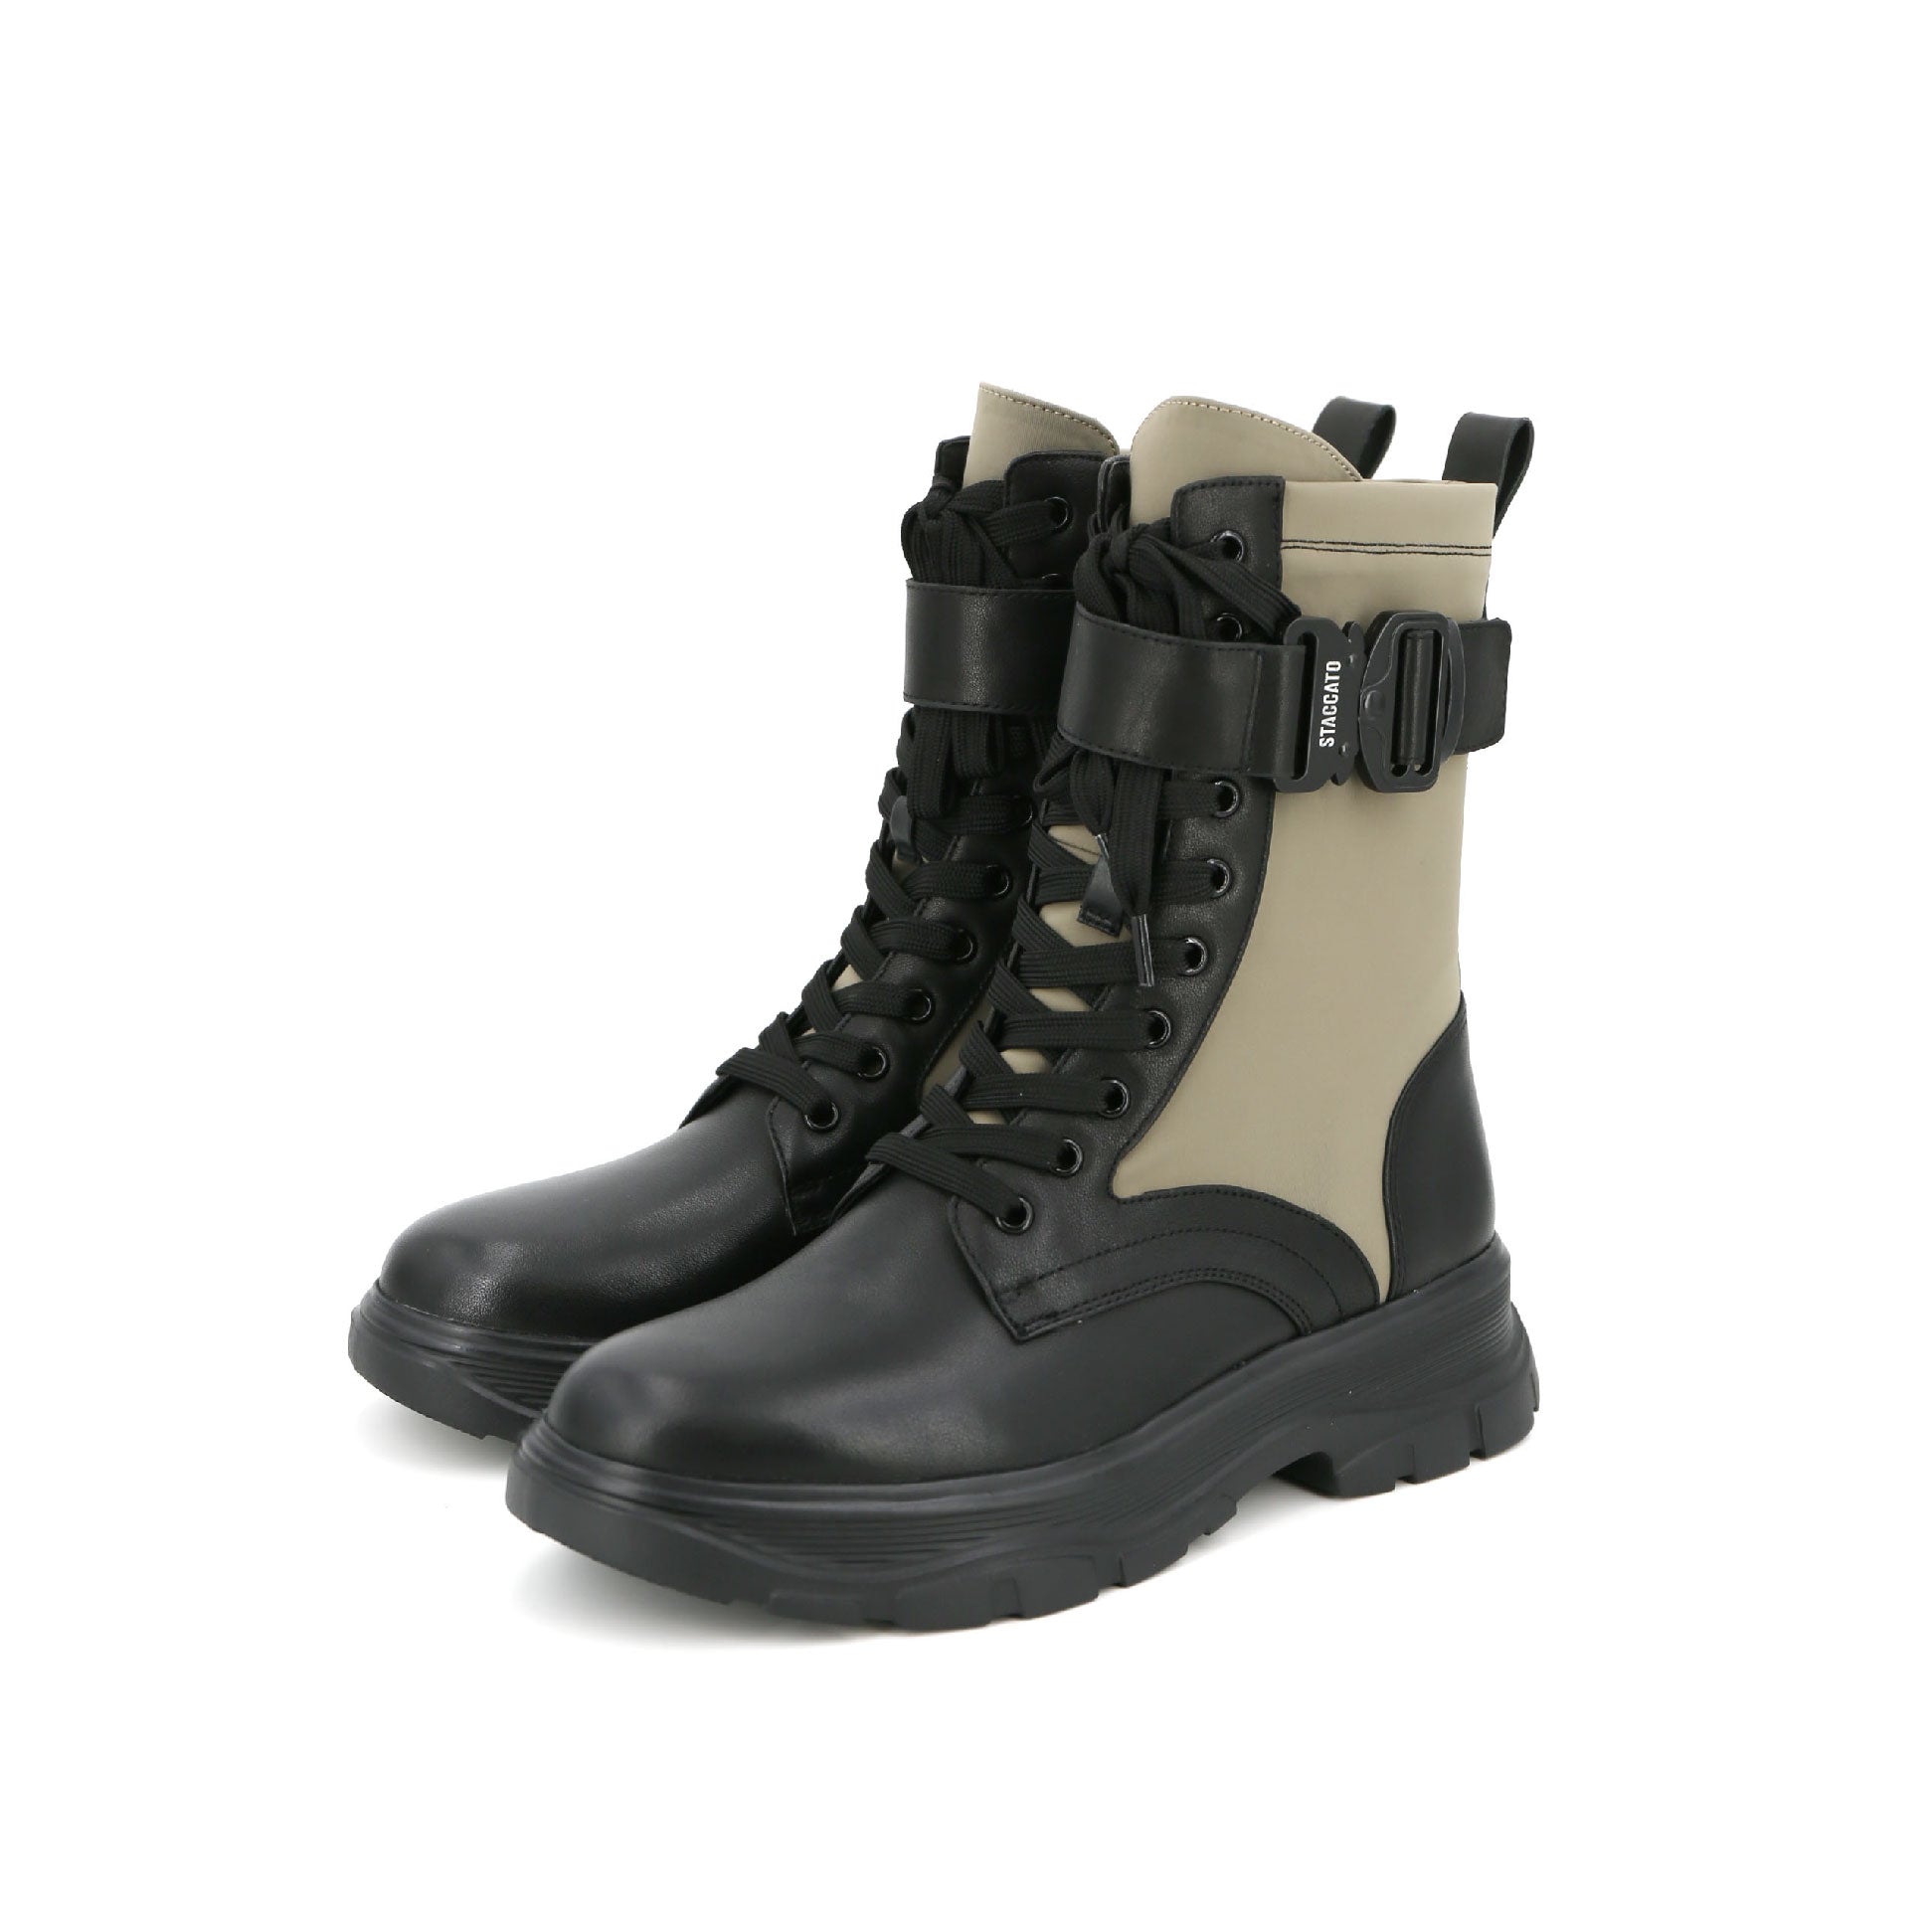 Green Military Combat Boots With Buckle